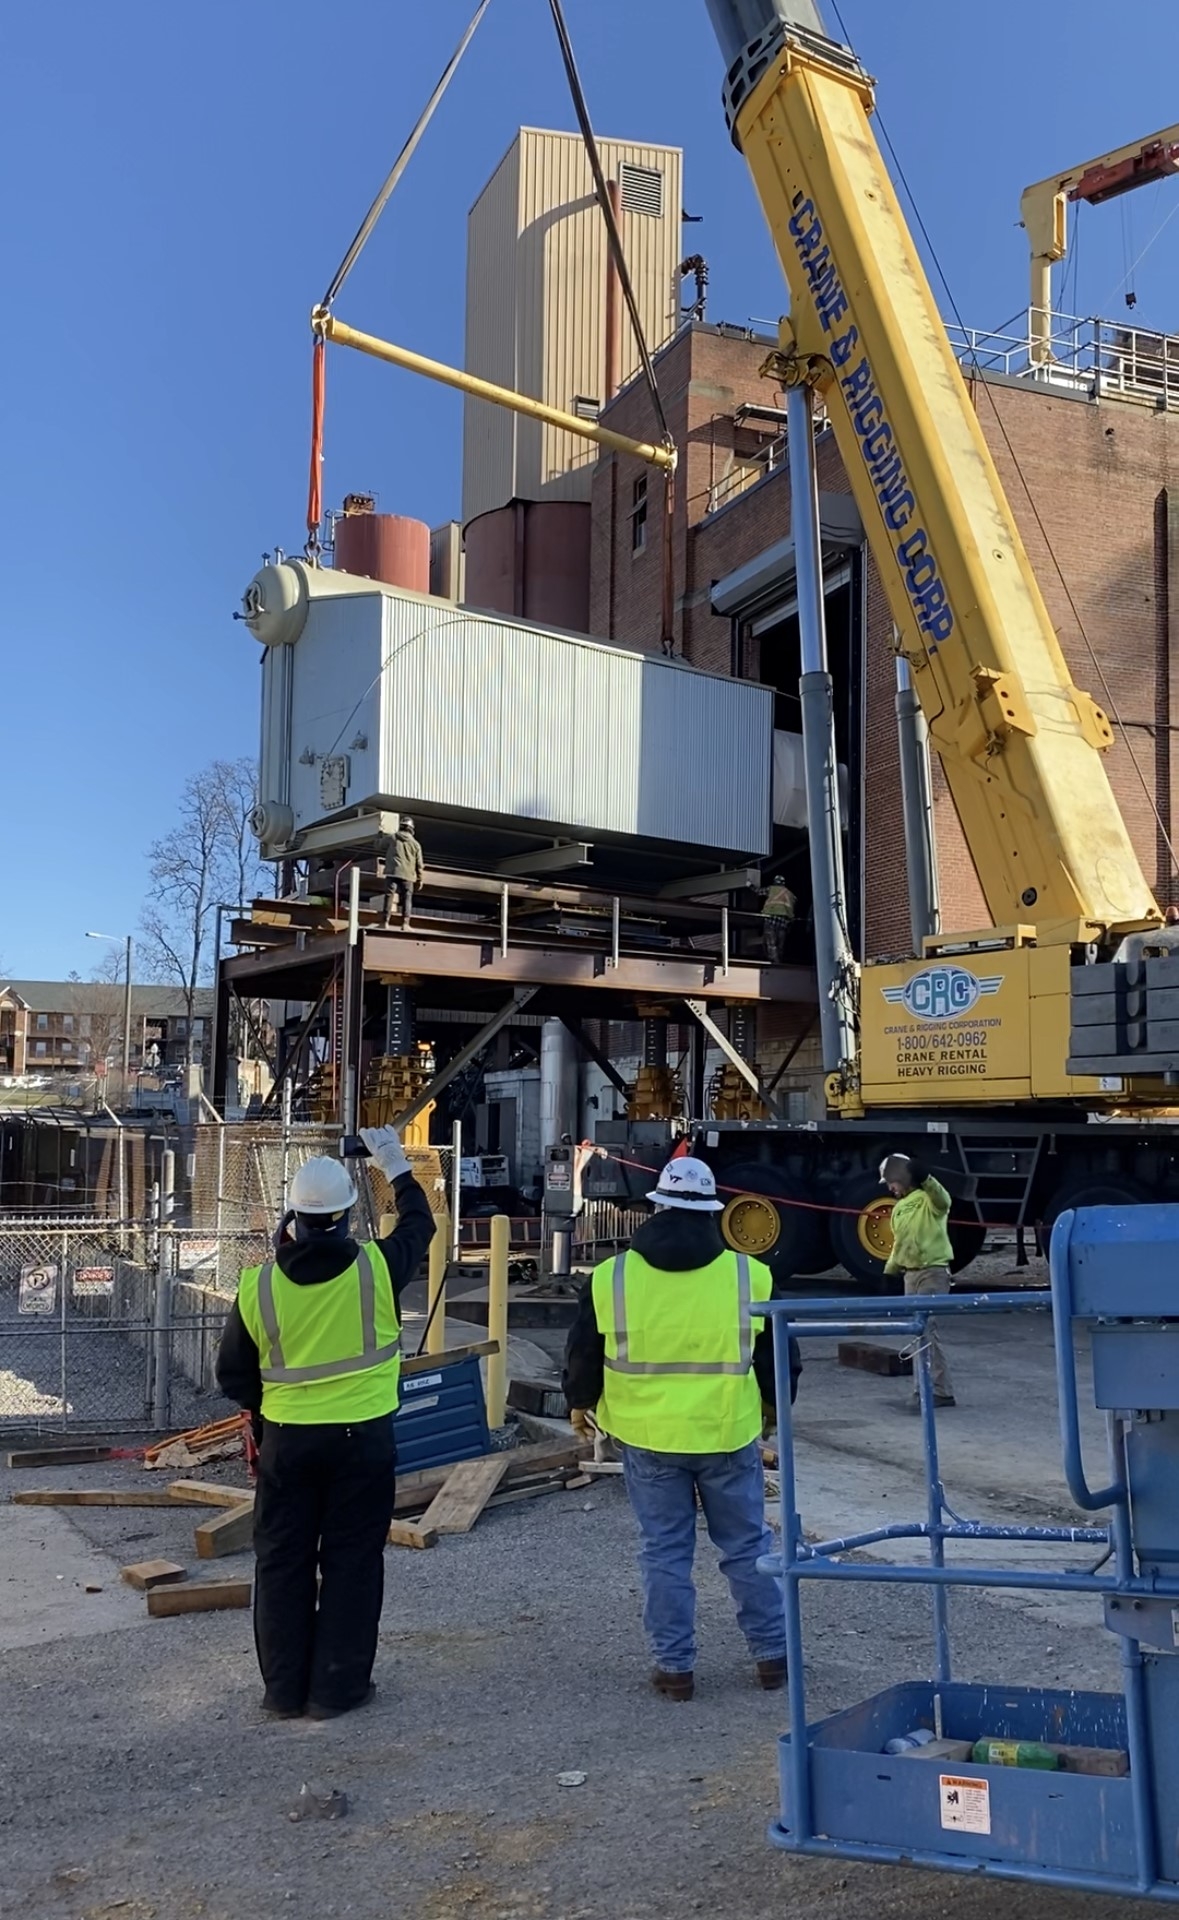 Boiler being lifted by crane and installed in the power plant.